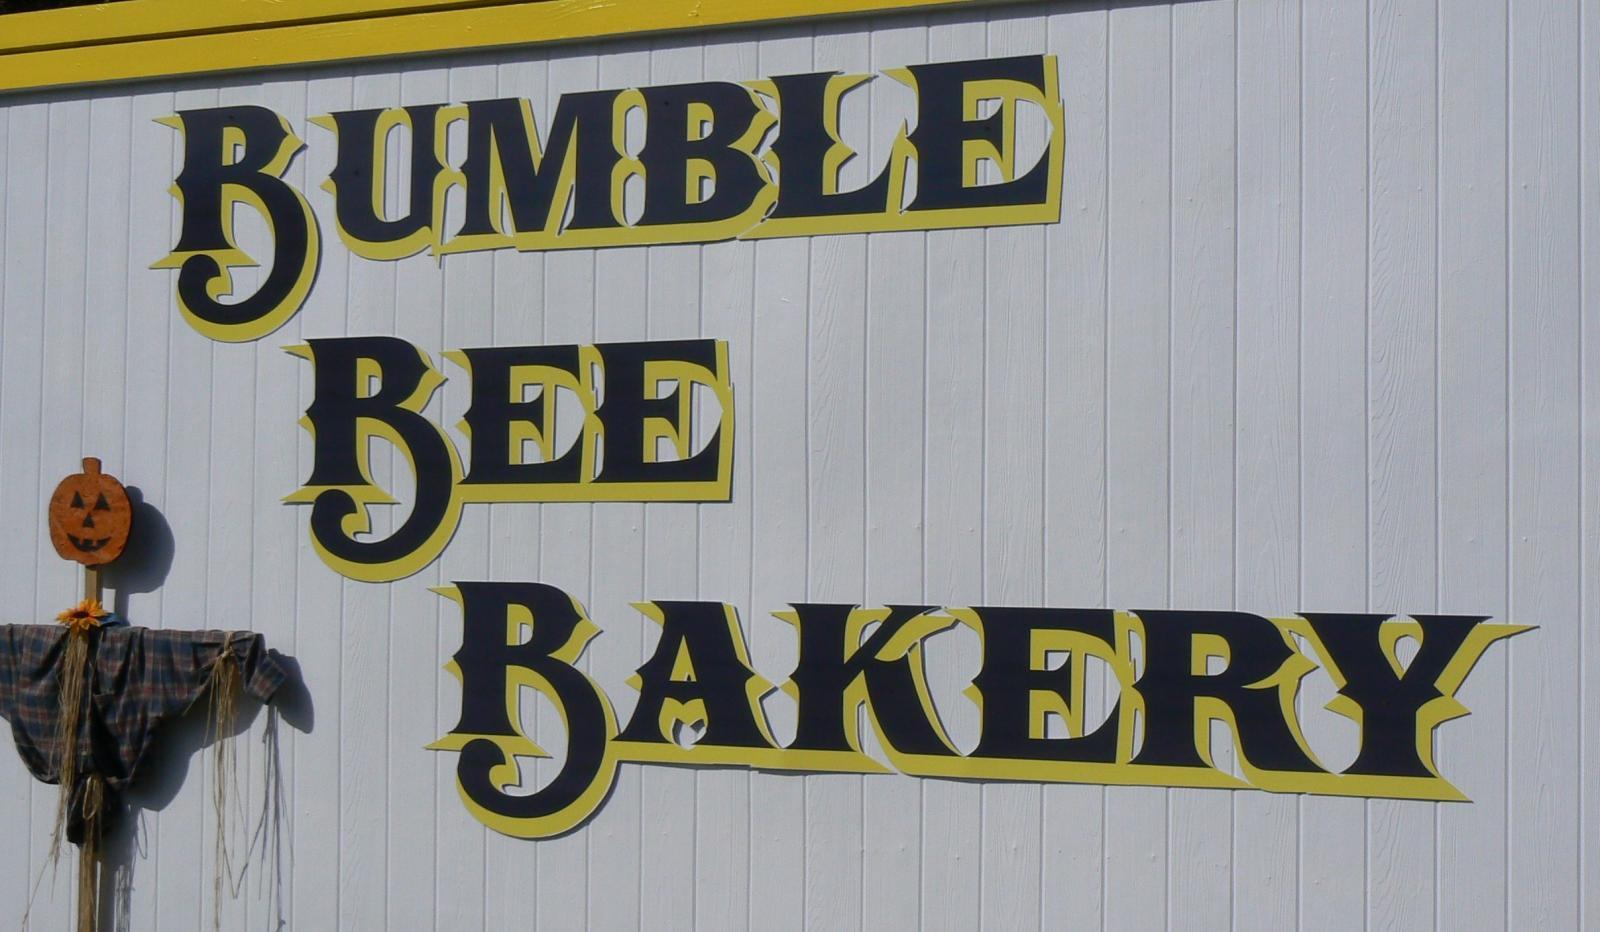 Bizness Happenings with Bumble Bee Bakery